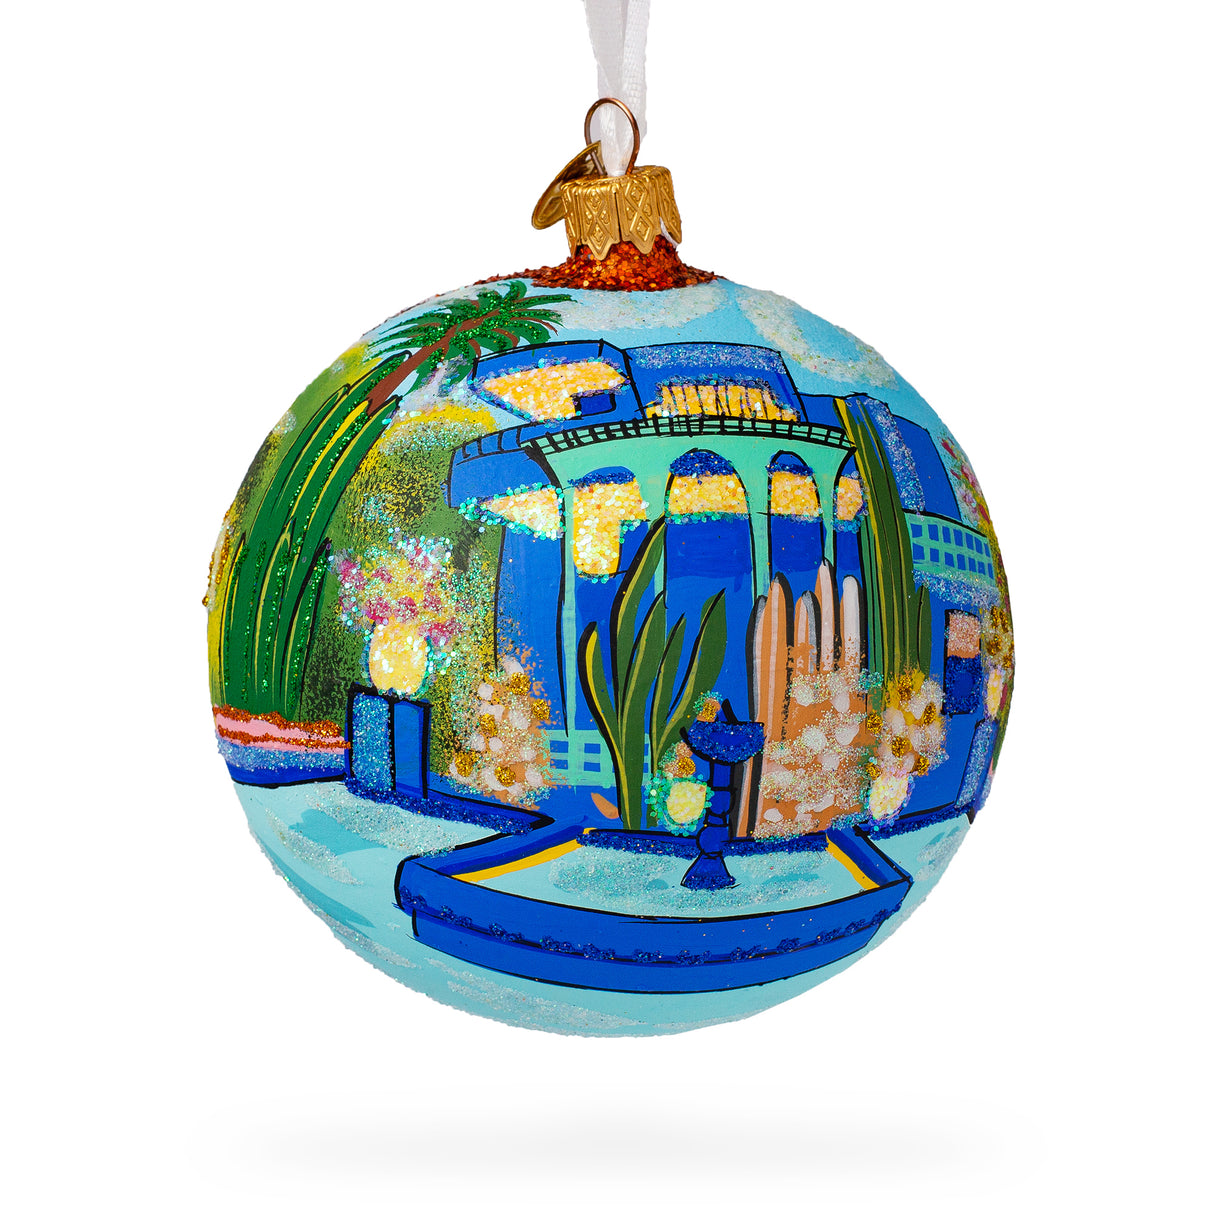 Jardin Majorelle, Marrakesh, Morocco Glass Ball Christmas Ornament 4 Inches in Blue color, Round shape